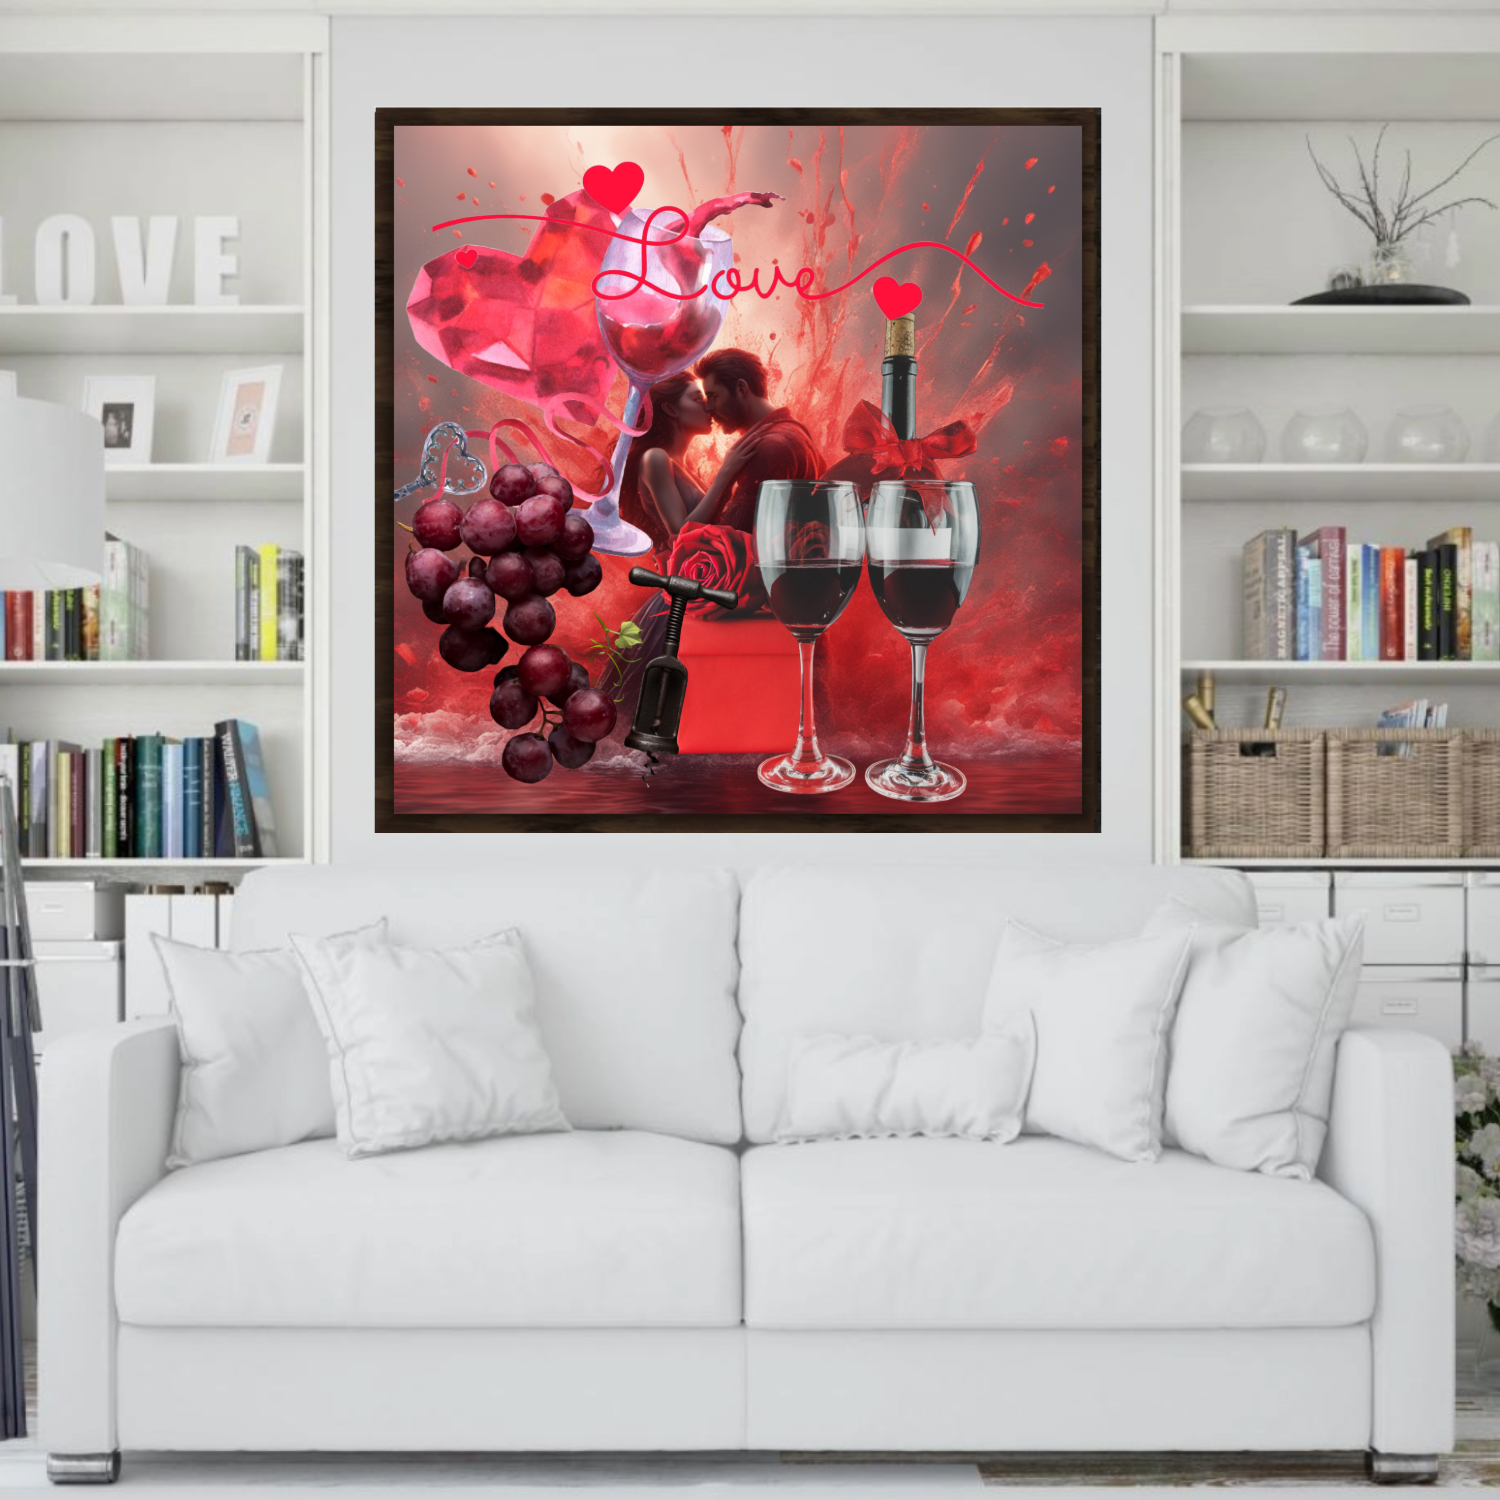 Wall Art LOVE RED WINE part of the LOVE in Red High Quality Artwork Giclee Print on Canvas 32x32 + Frame, ready to hang